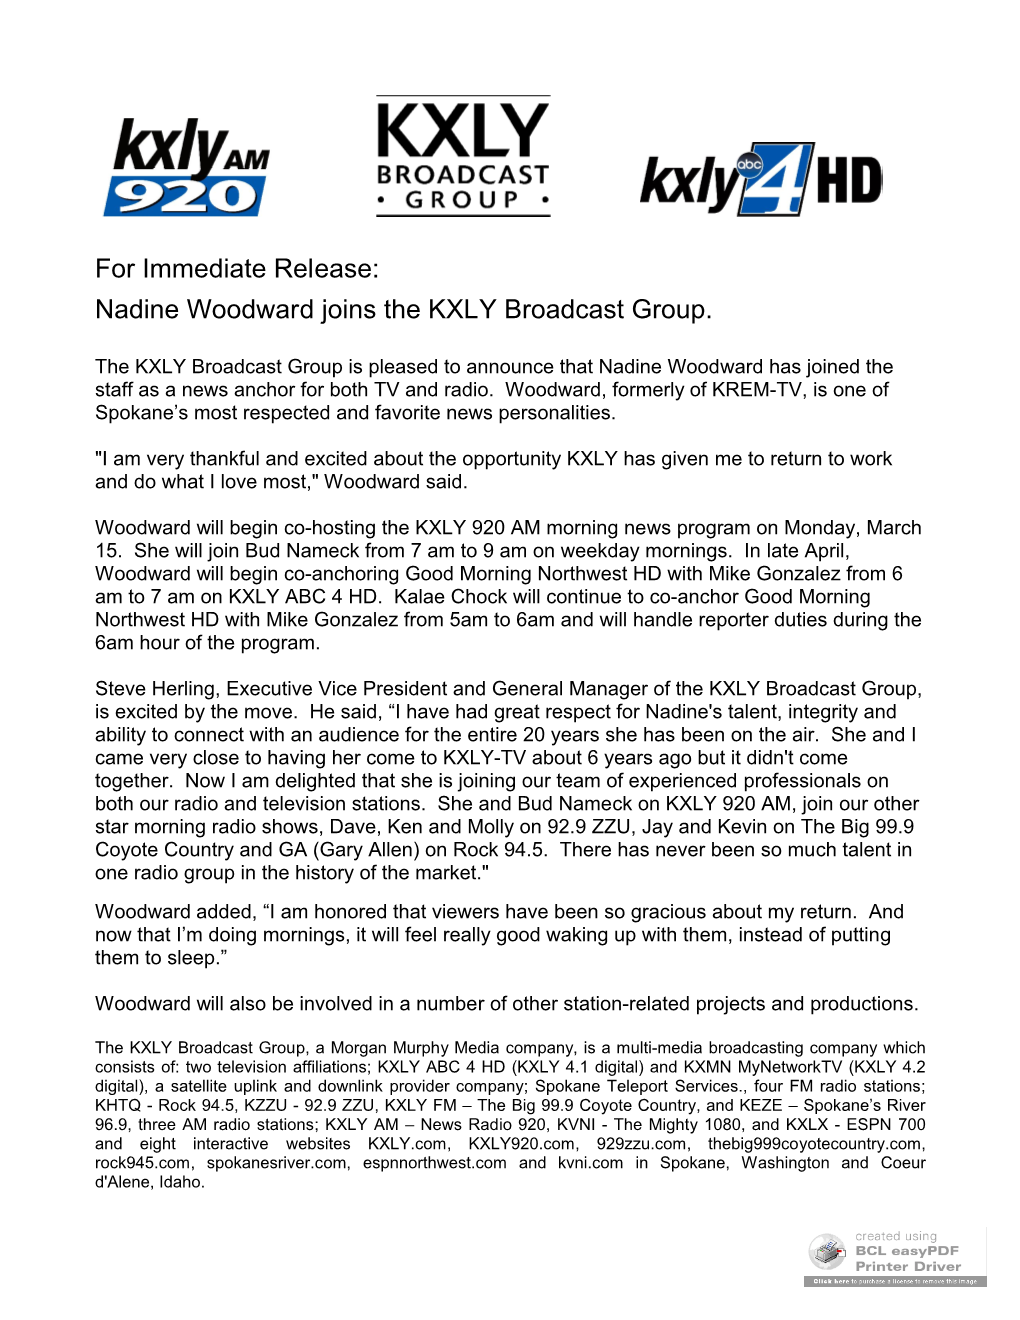 Nadine Woodward Joins the KXLY Broadcast Group